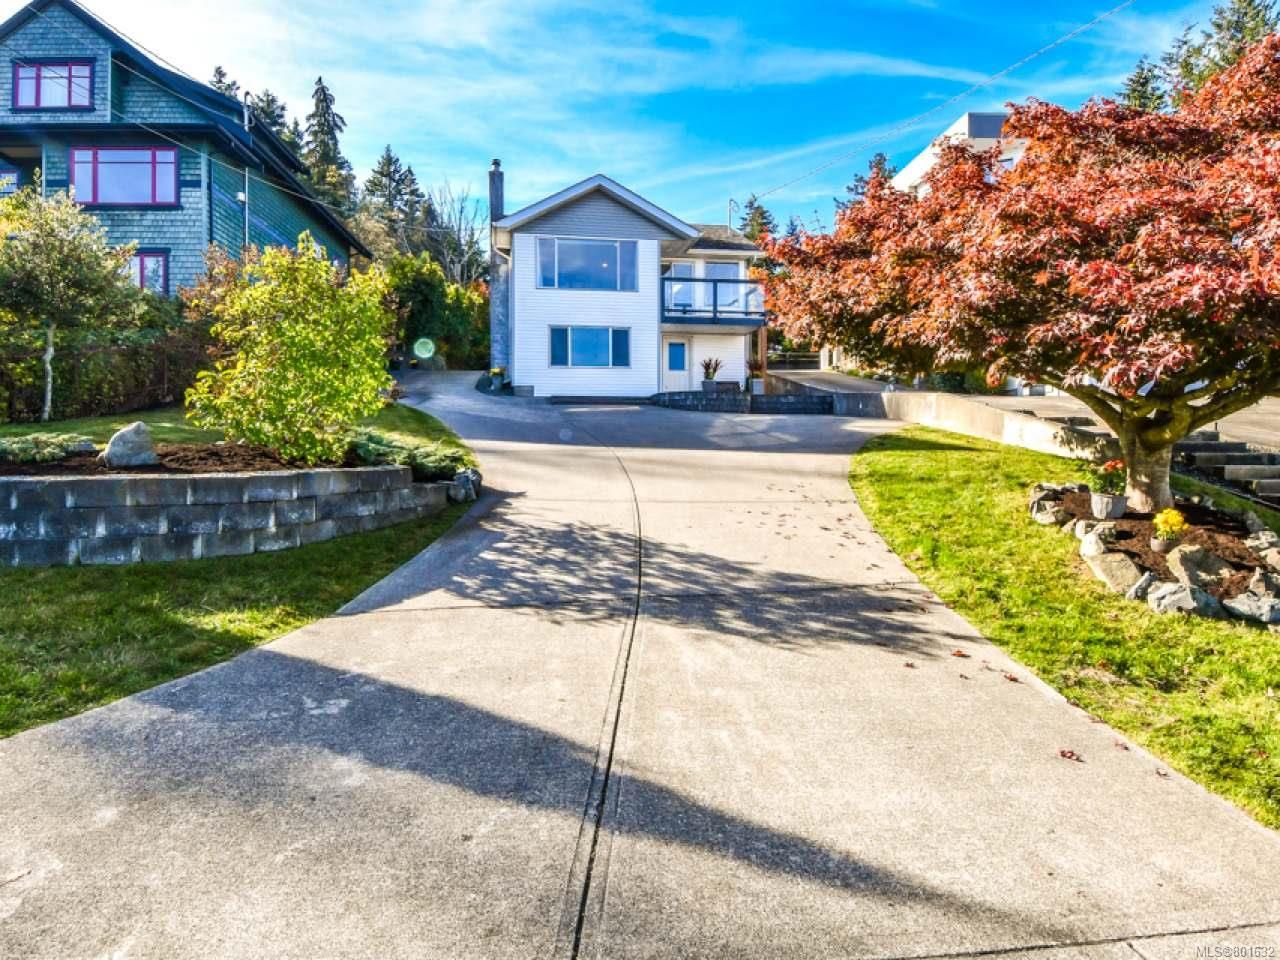 Main Photo: 520 Thulin St in CAMPBELL RIVER: CR Campbell River Central House for sale (Campbell River)  : MLS®# 801632